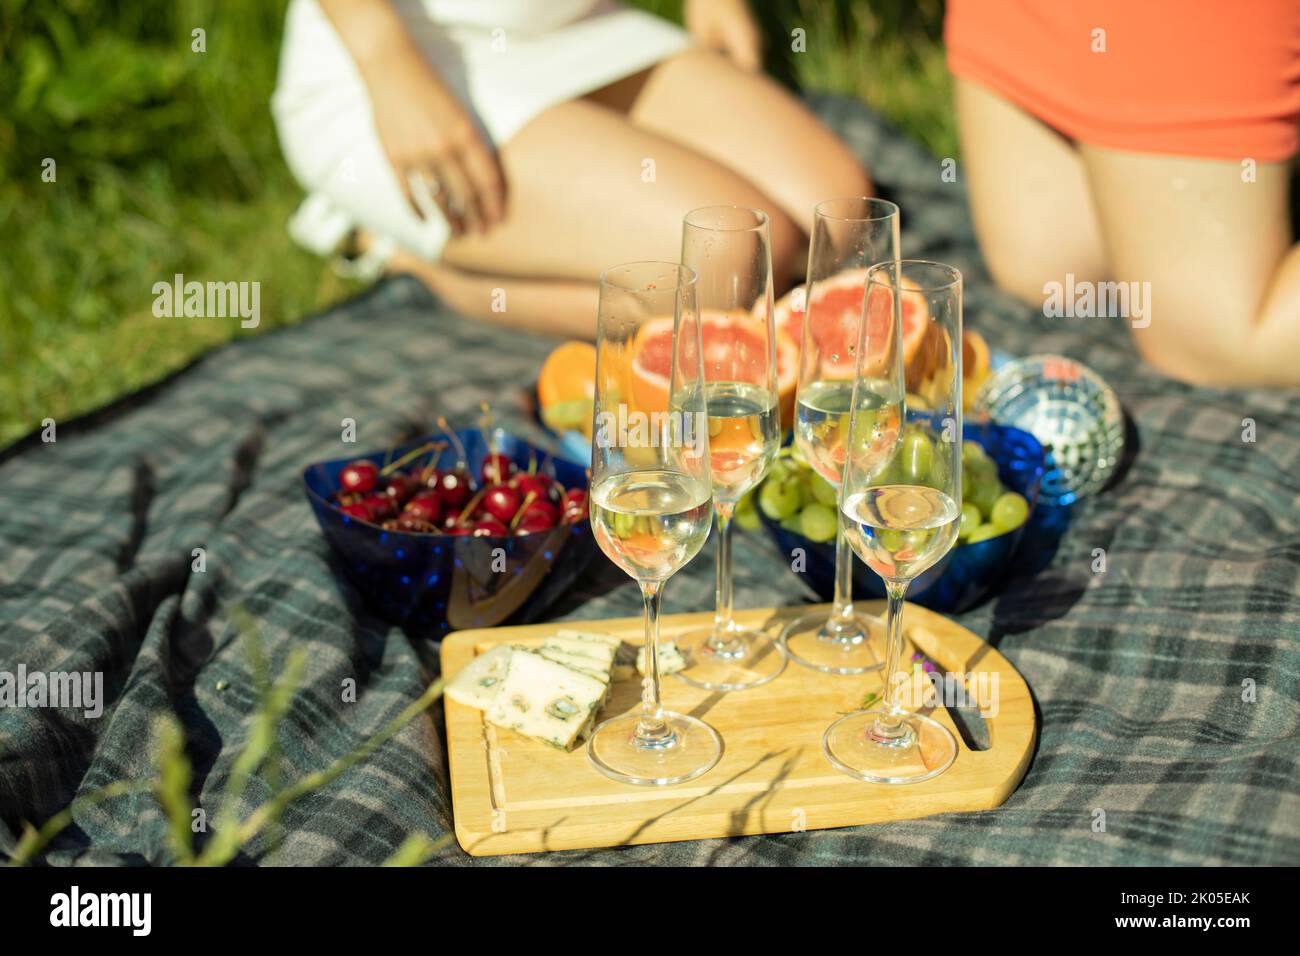 Picnic in summer in park. Food on background of girls. Champagne glasses. Details of rest in park. Food on street. Fruits mime drinks. Stock Photo